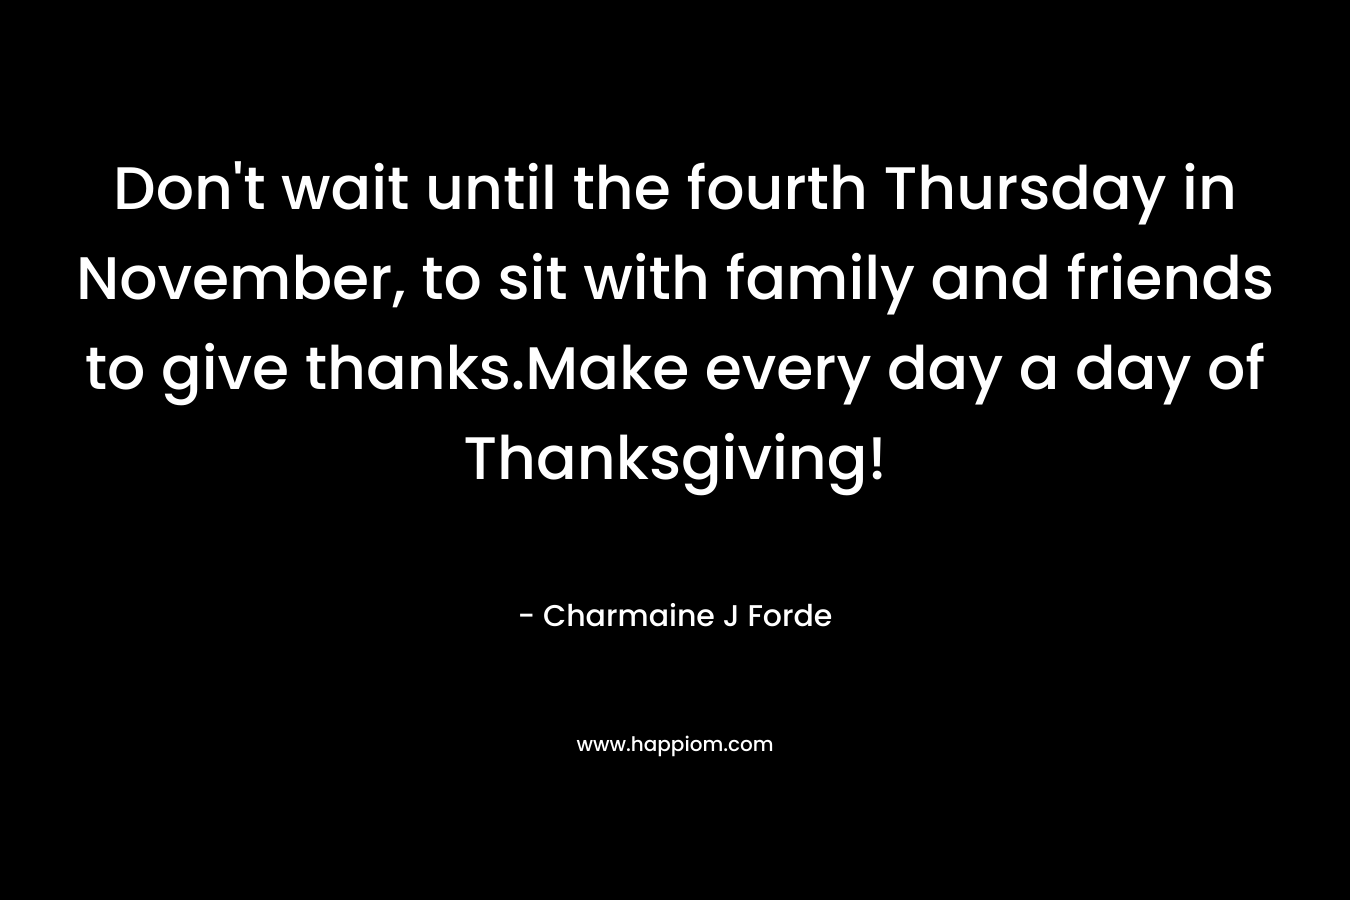 Don't wait until the fourth Thursday in November, to sit with family and friends to give thanks.Make every day a day of Thanksgiving!